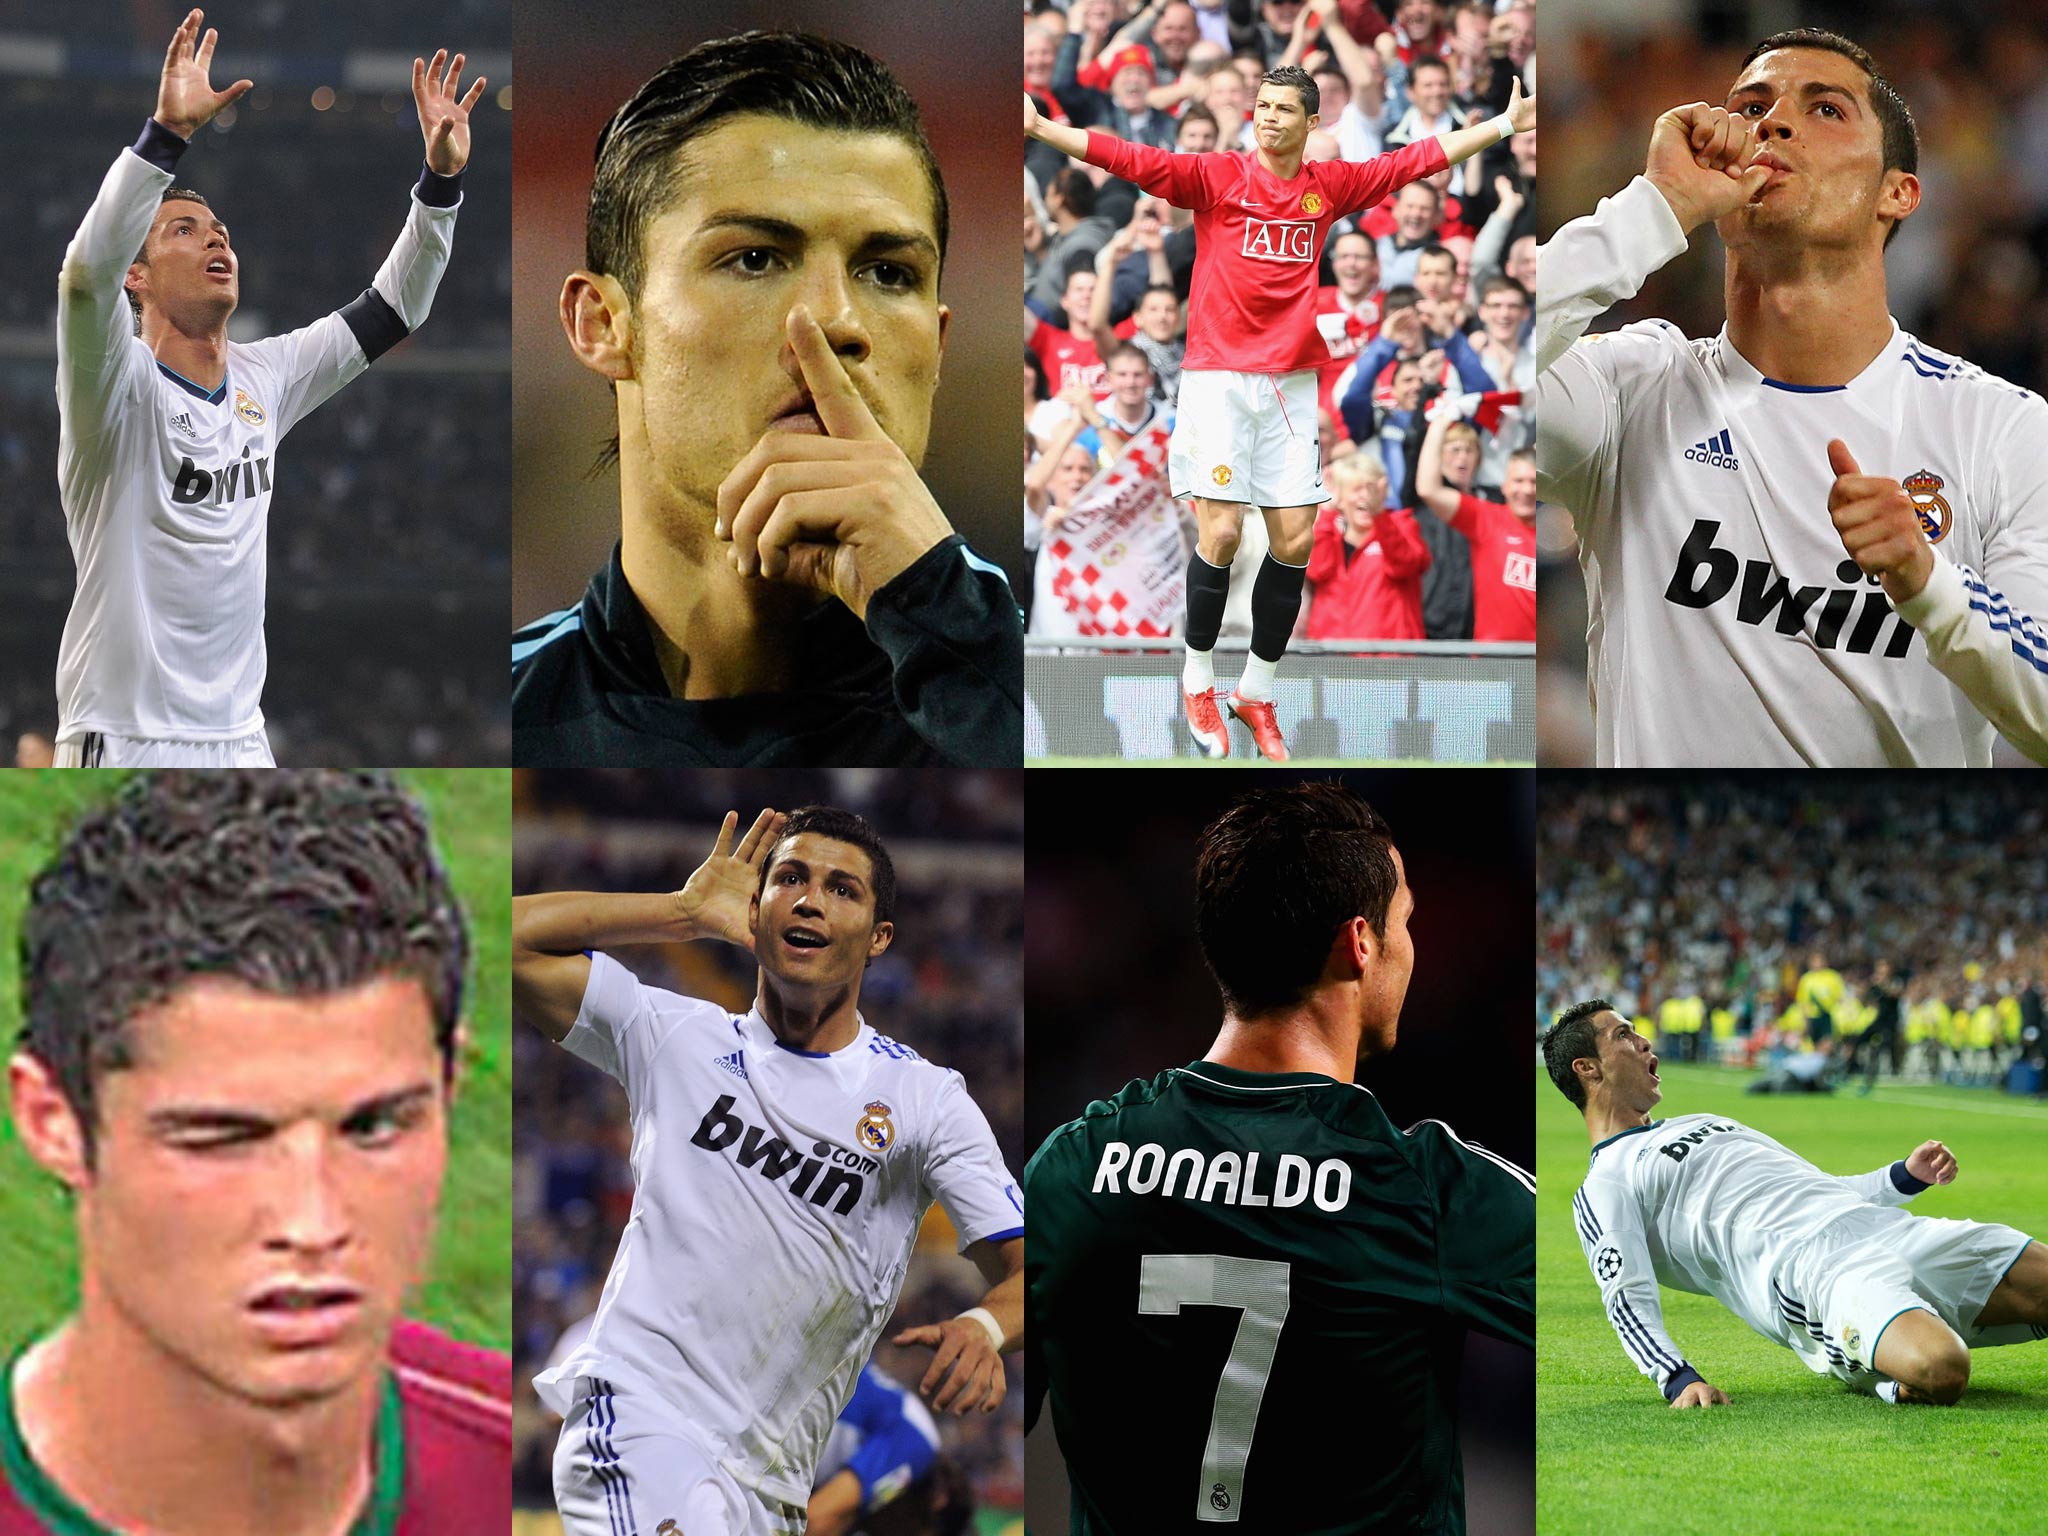 Cristiano Ronaldo has many different celebrations in the locker... click through as we speculate which one he might use against Manchester United...